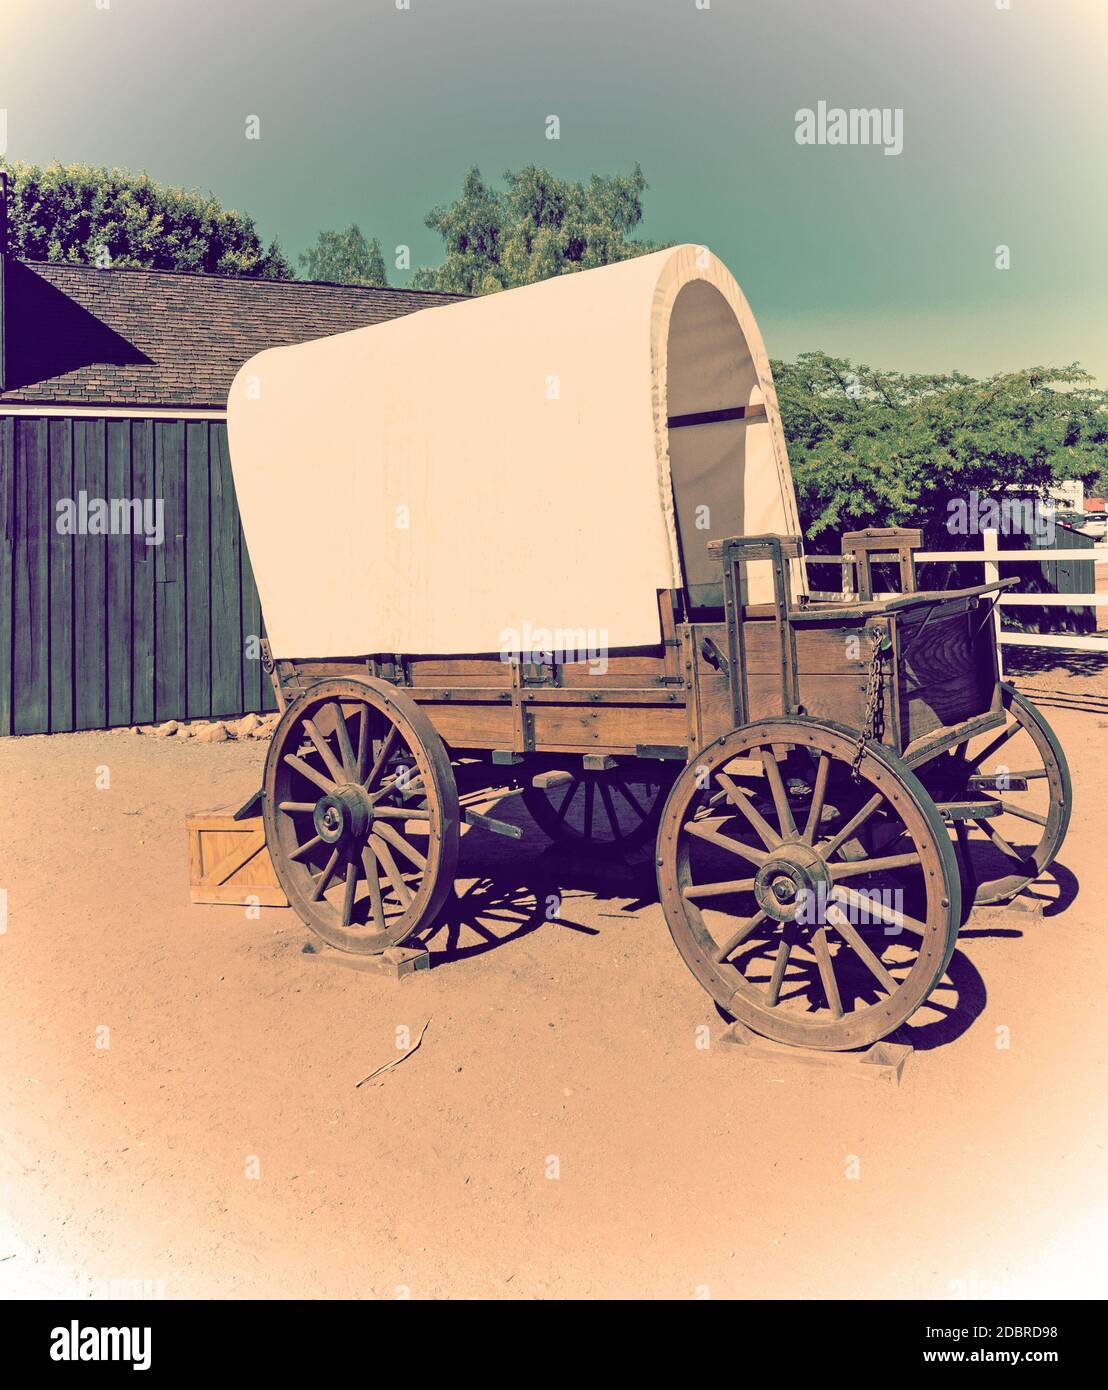 Wild west cart in vintage tone Stock Photo